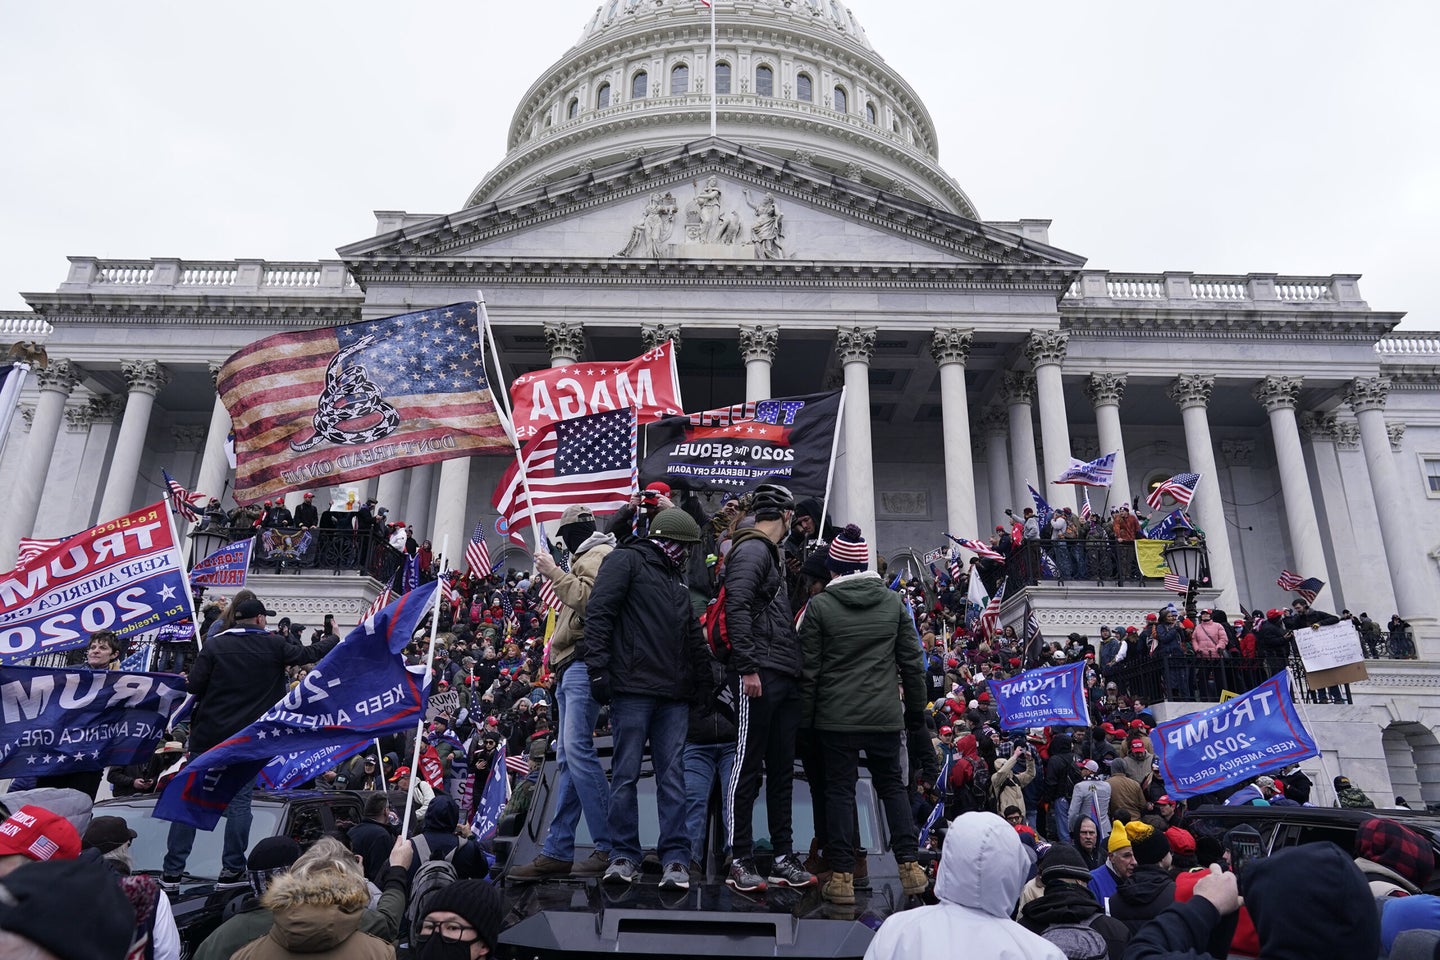 Protesters gather on the second day of pro-Trump events fueled by President Donald Trump's continued claims of election fraud in an to overturn the results before Congress finalizes them in a joint session of the 117th Congress.